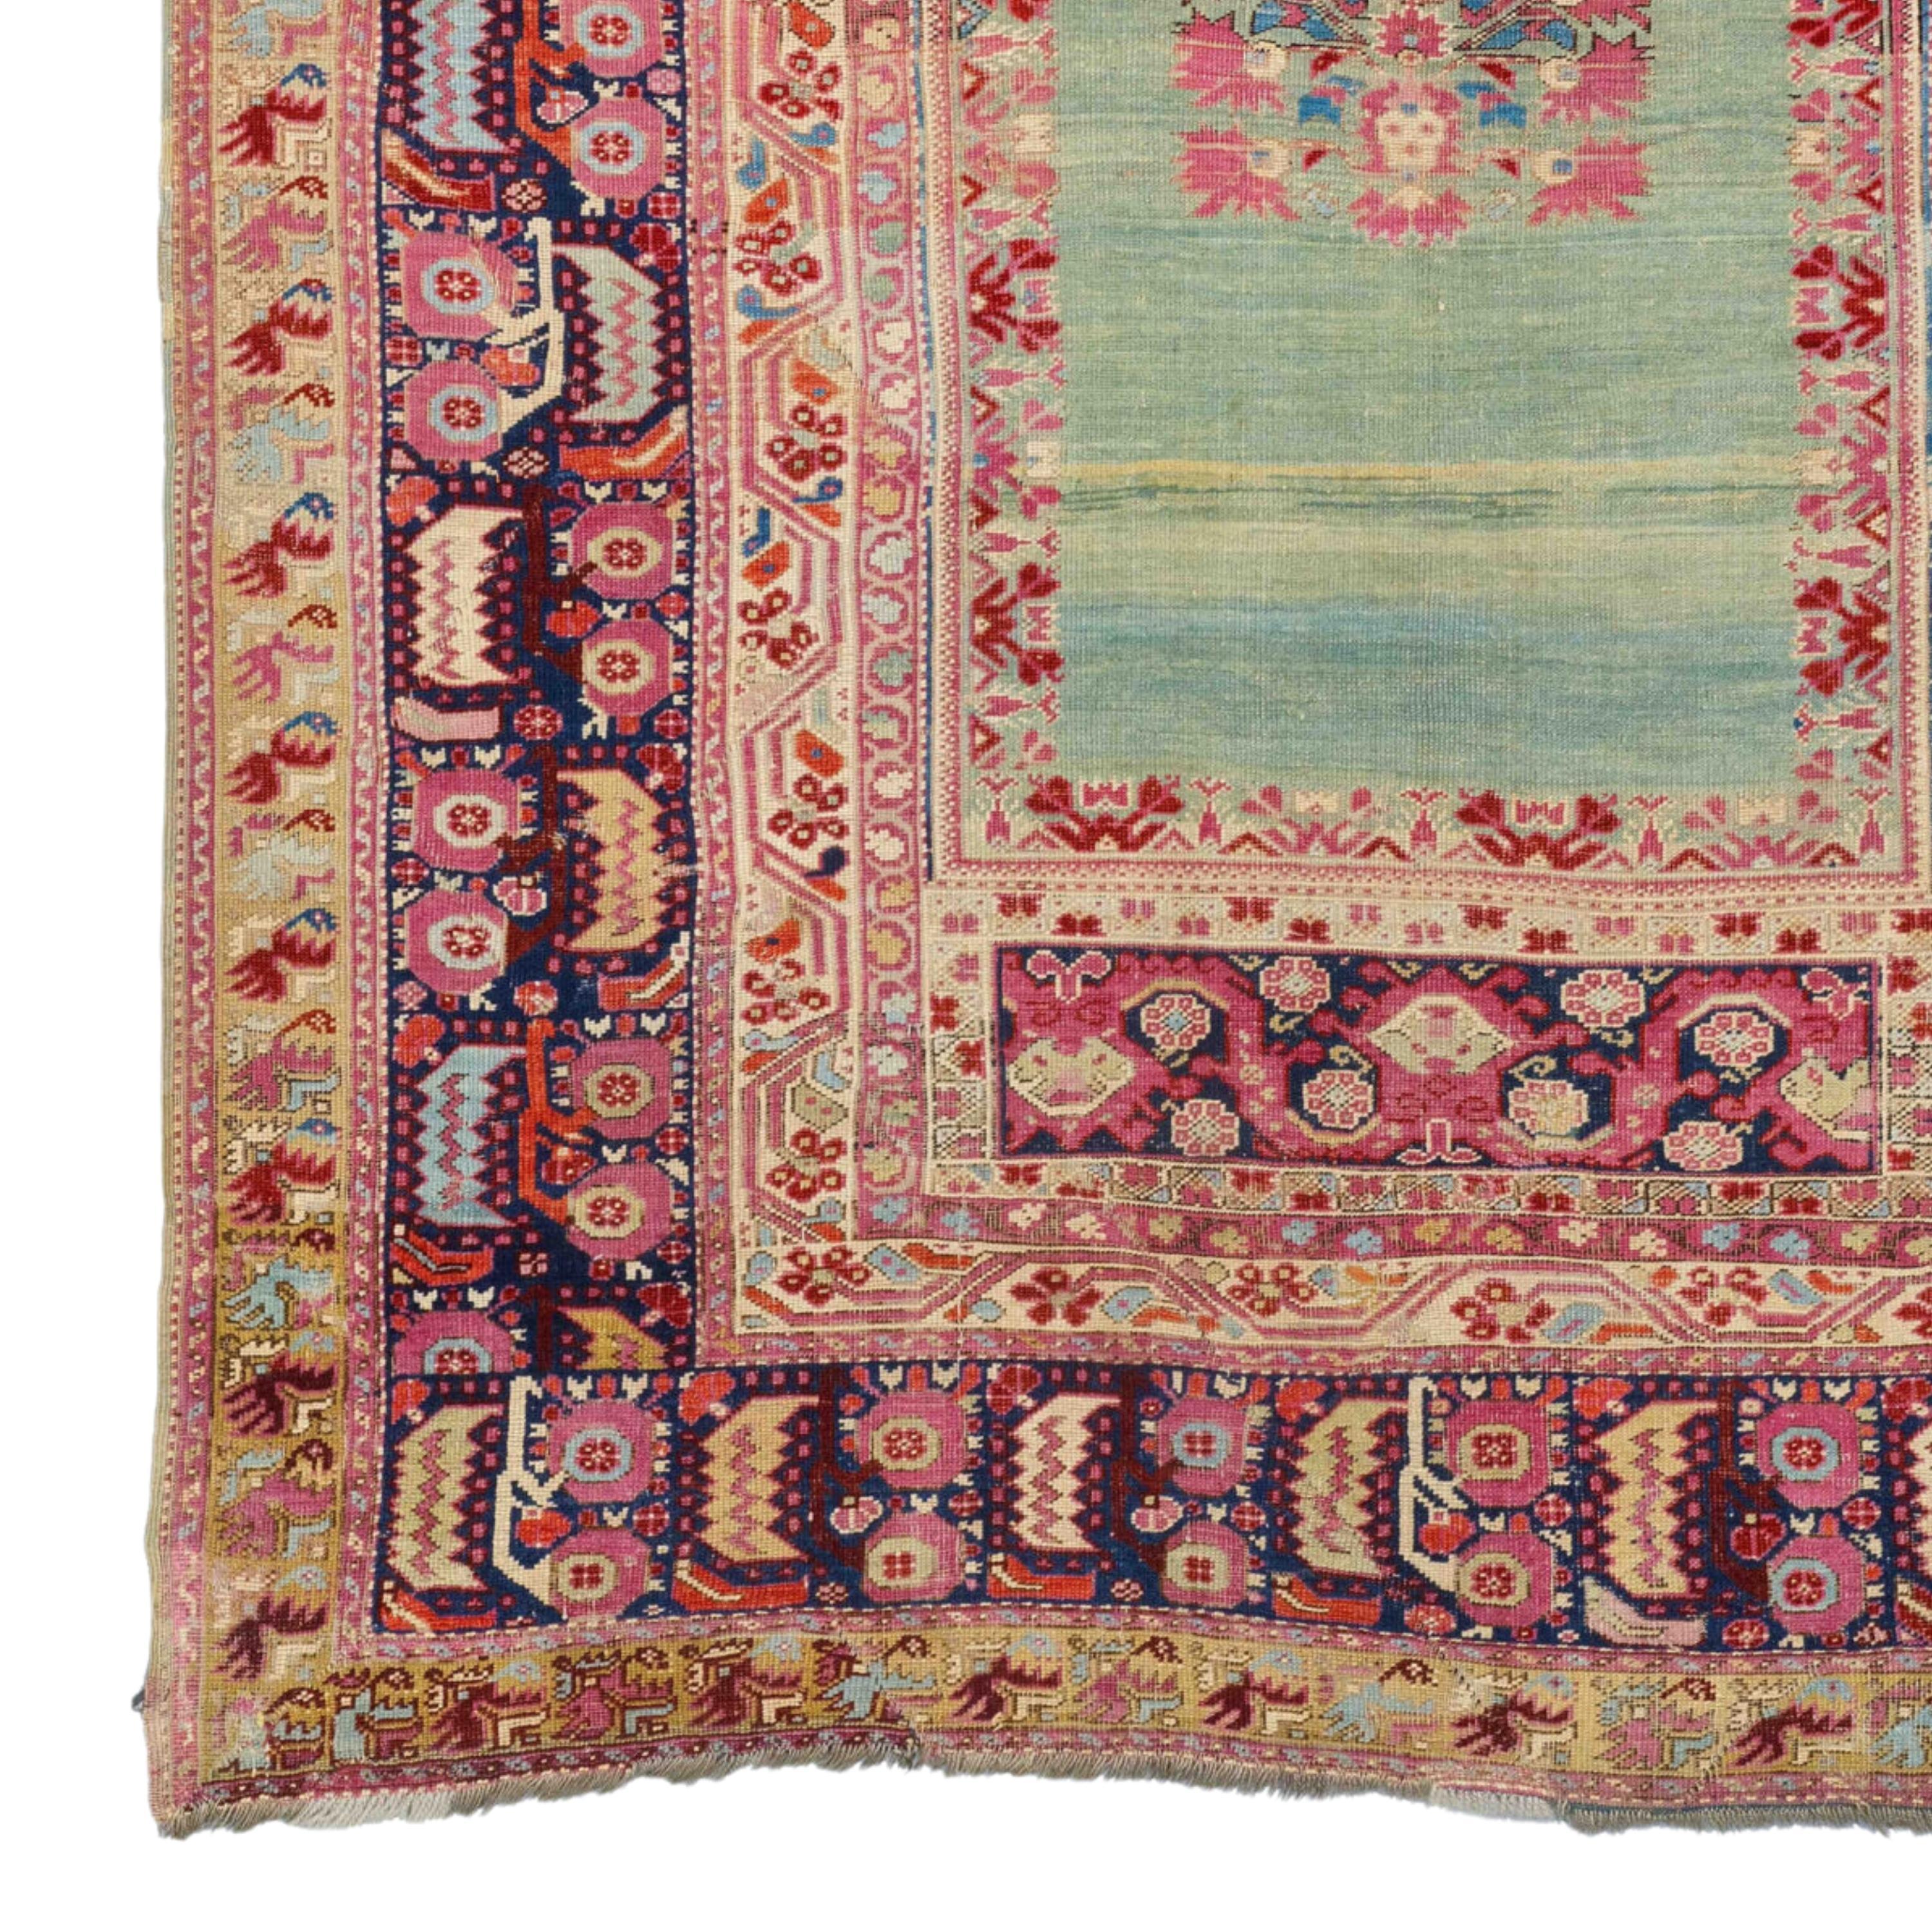 Antique Ghiordes Rug - 19th Century Anatolian Ghiordes Rug Size 146 × 217 cm (4,79 x 7,11 ft)

Characteristics of the Ghiordes carpet include a finely stepped acute arch with prominent shoulders, and two cross panels, one above and the other below